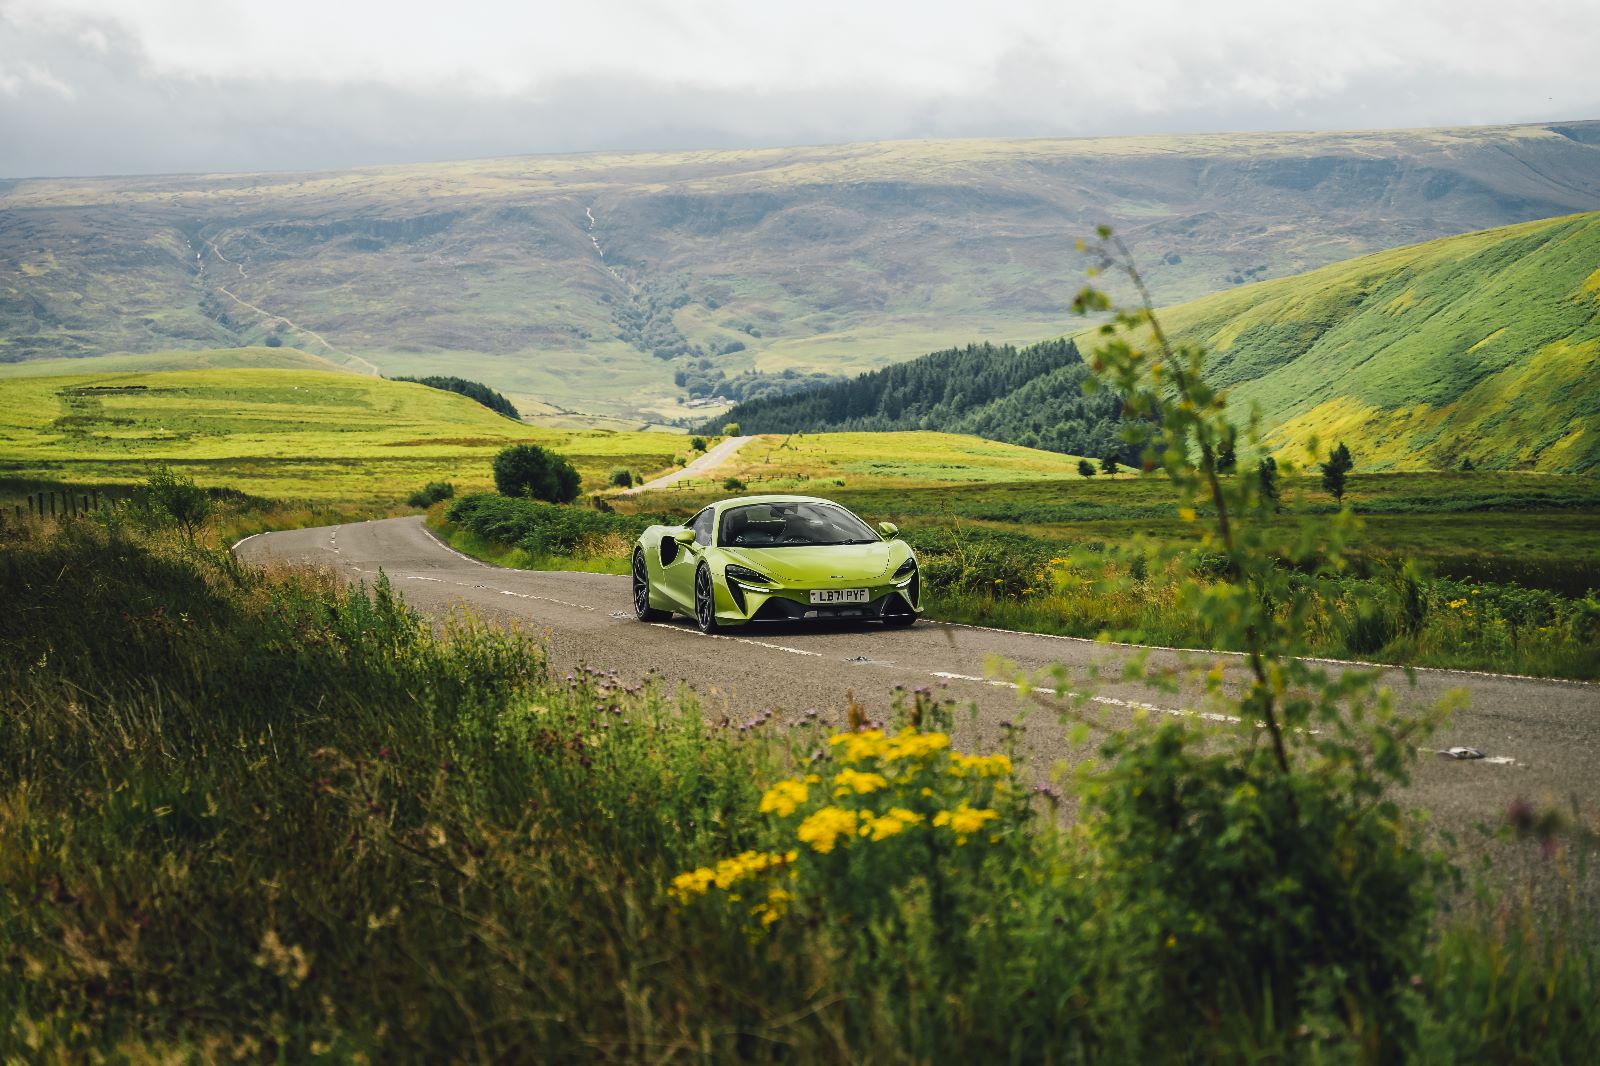 A green mclaren sports car driving down a country road.